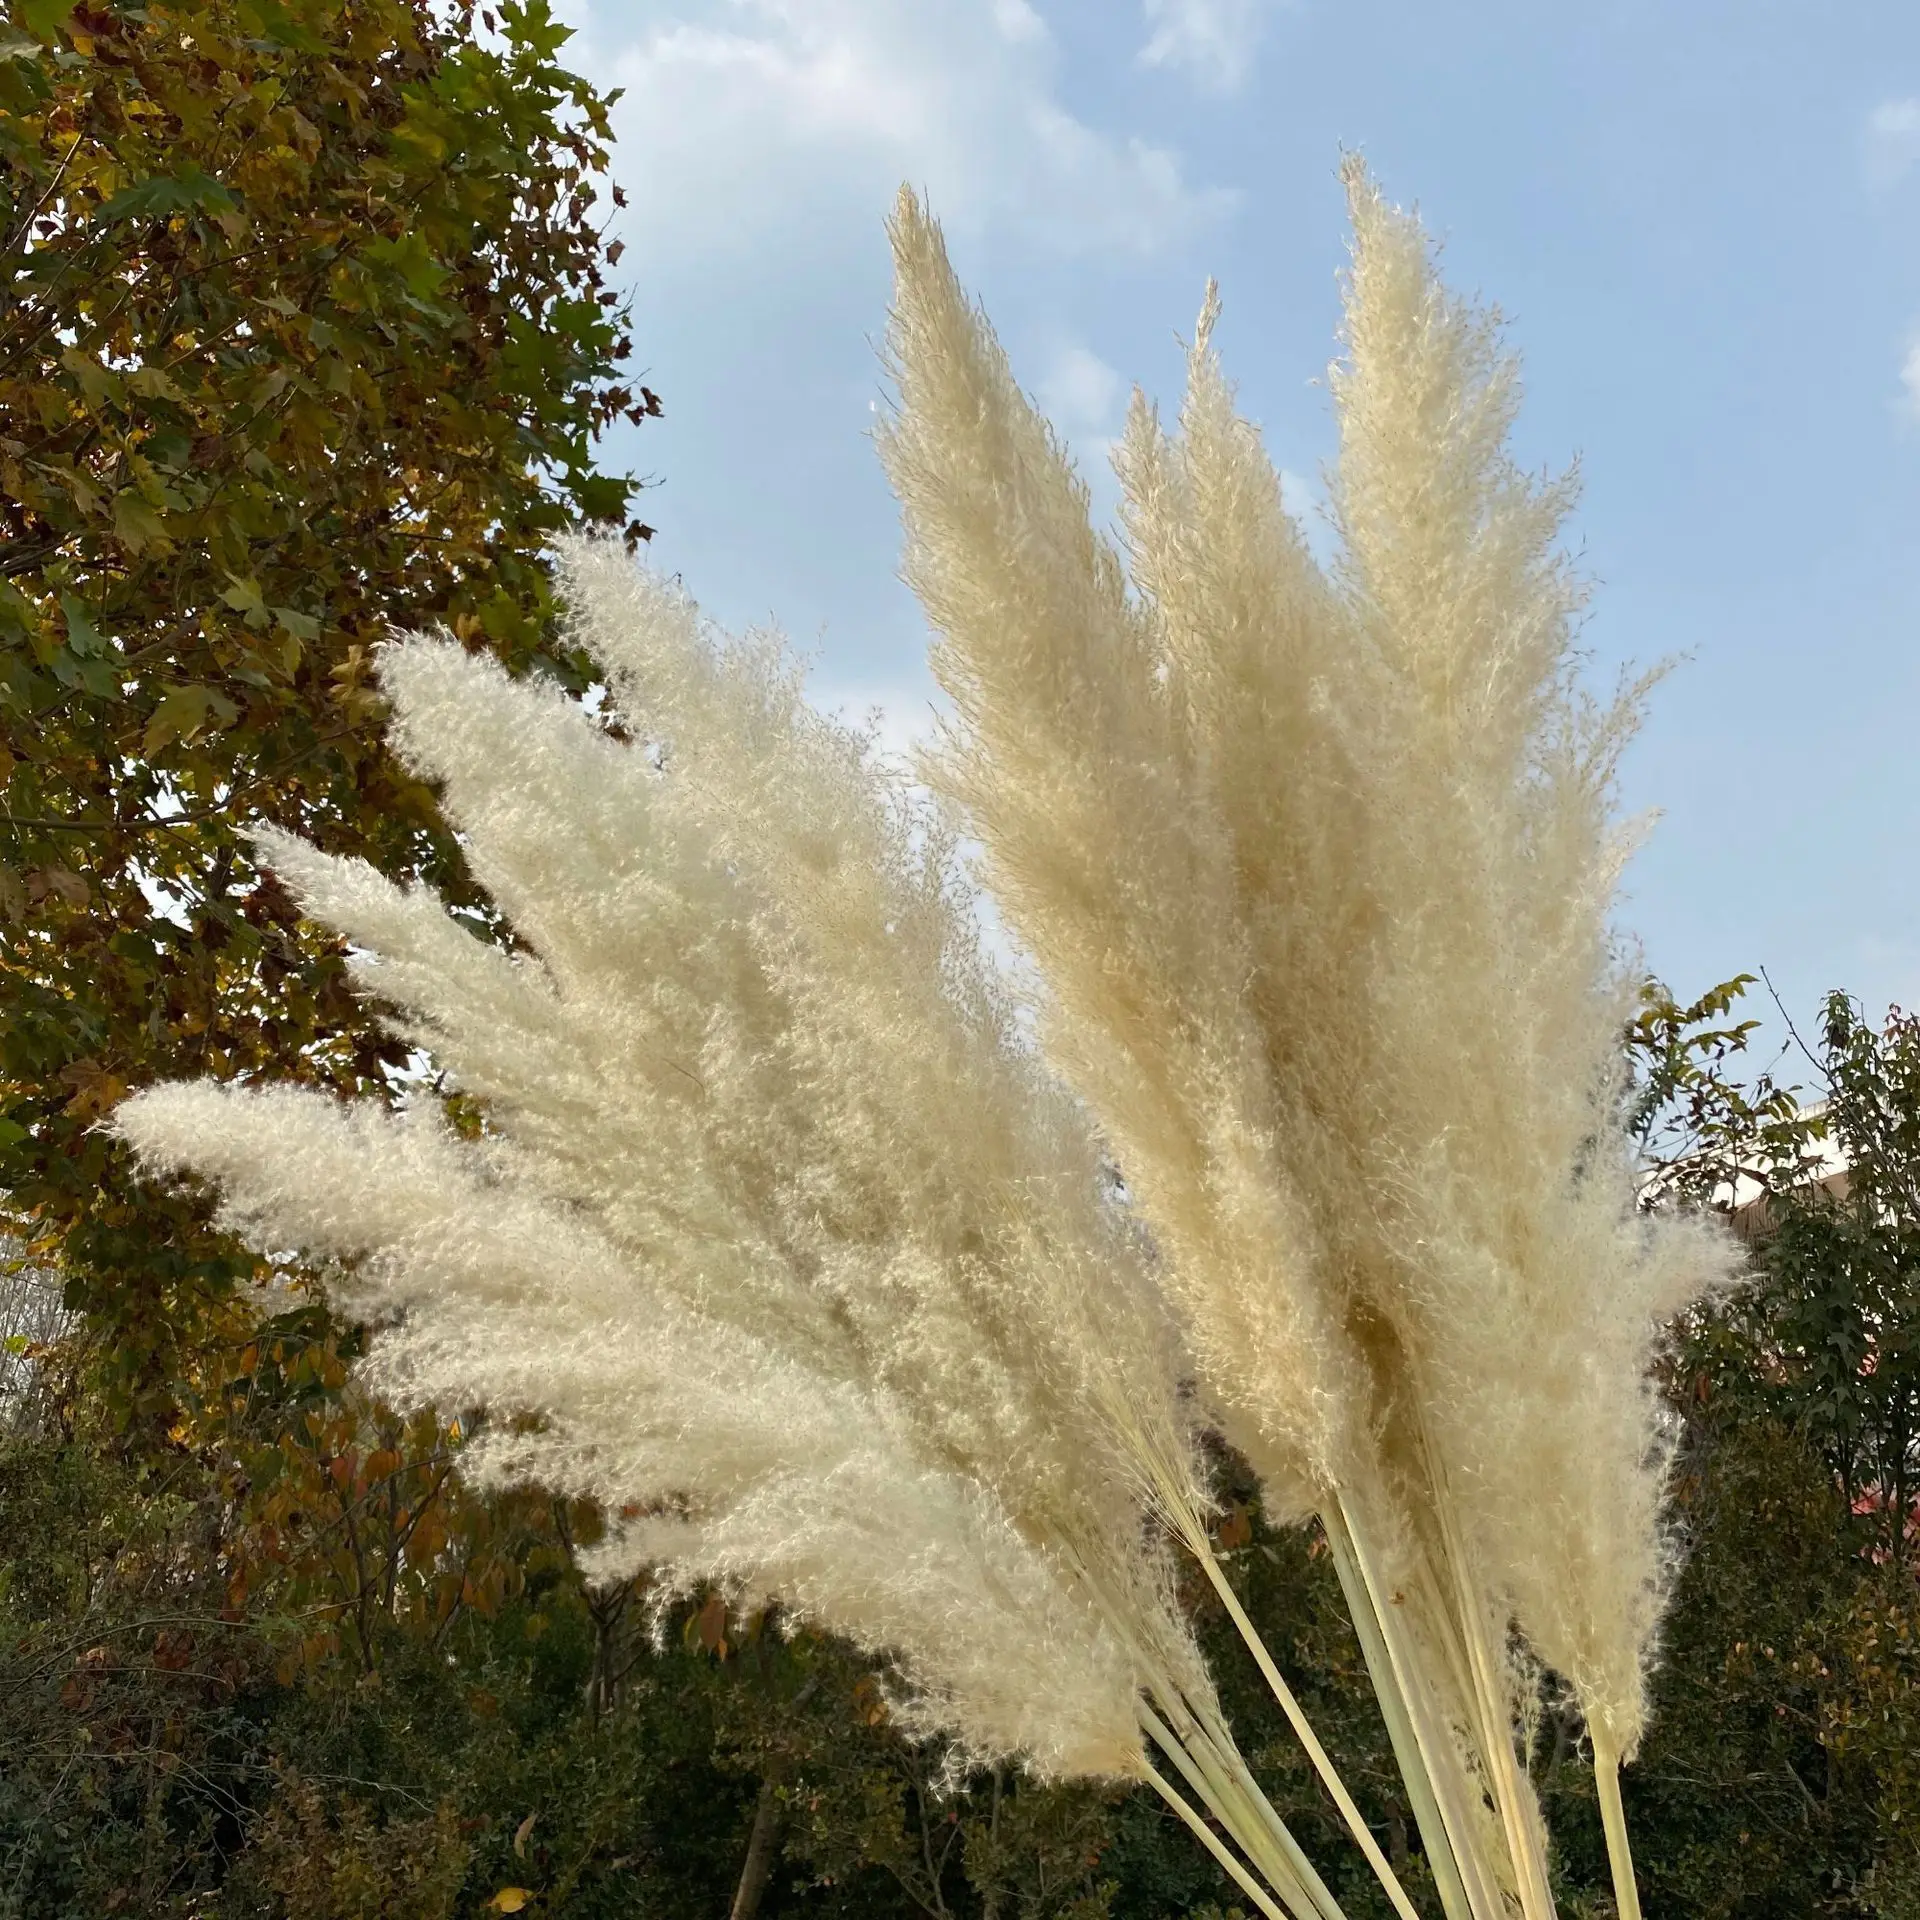 High Quality Dried Flower 90cm 120cm Other Decorative Flowers And Plants Pampas Grass Artificial